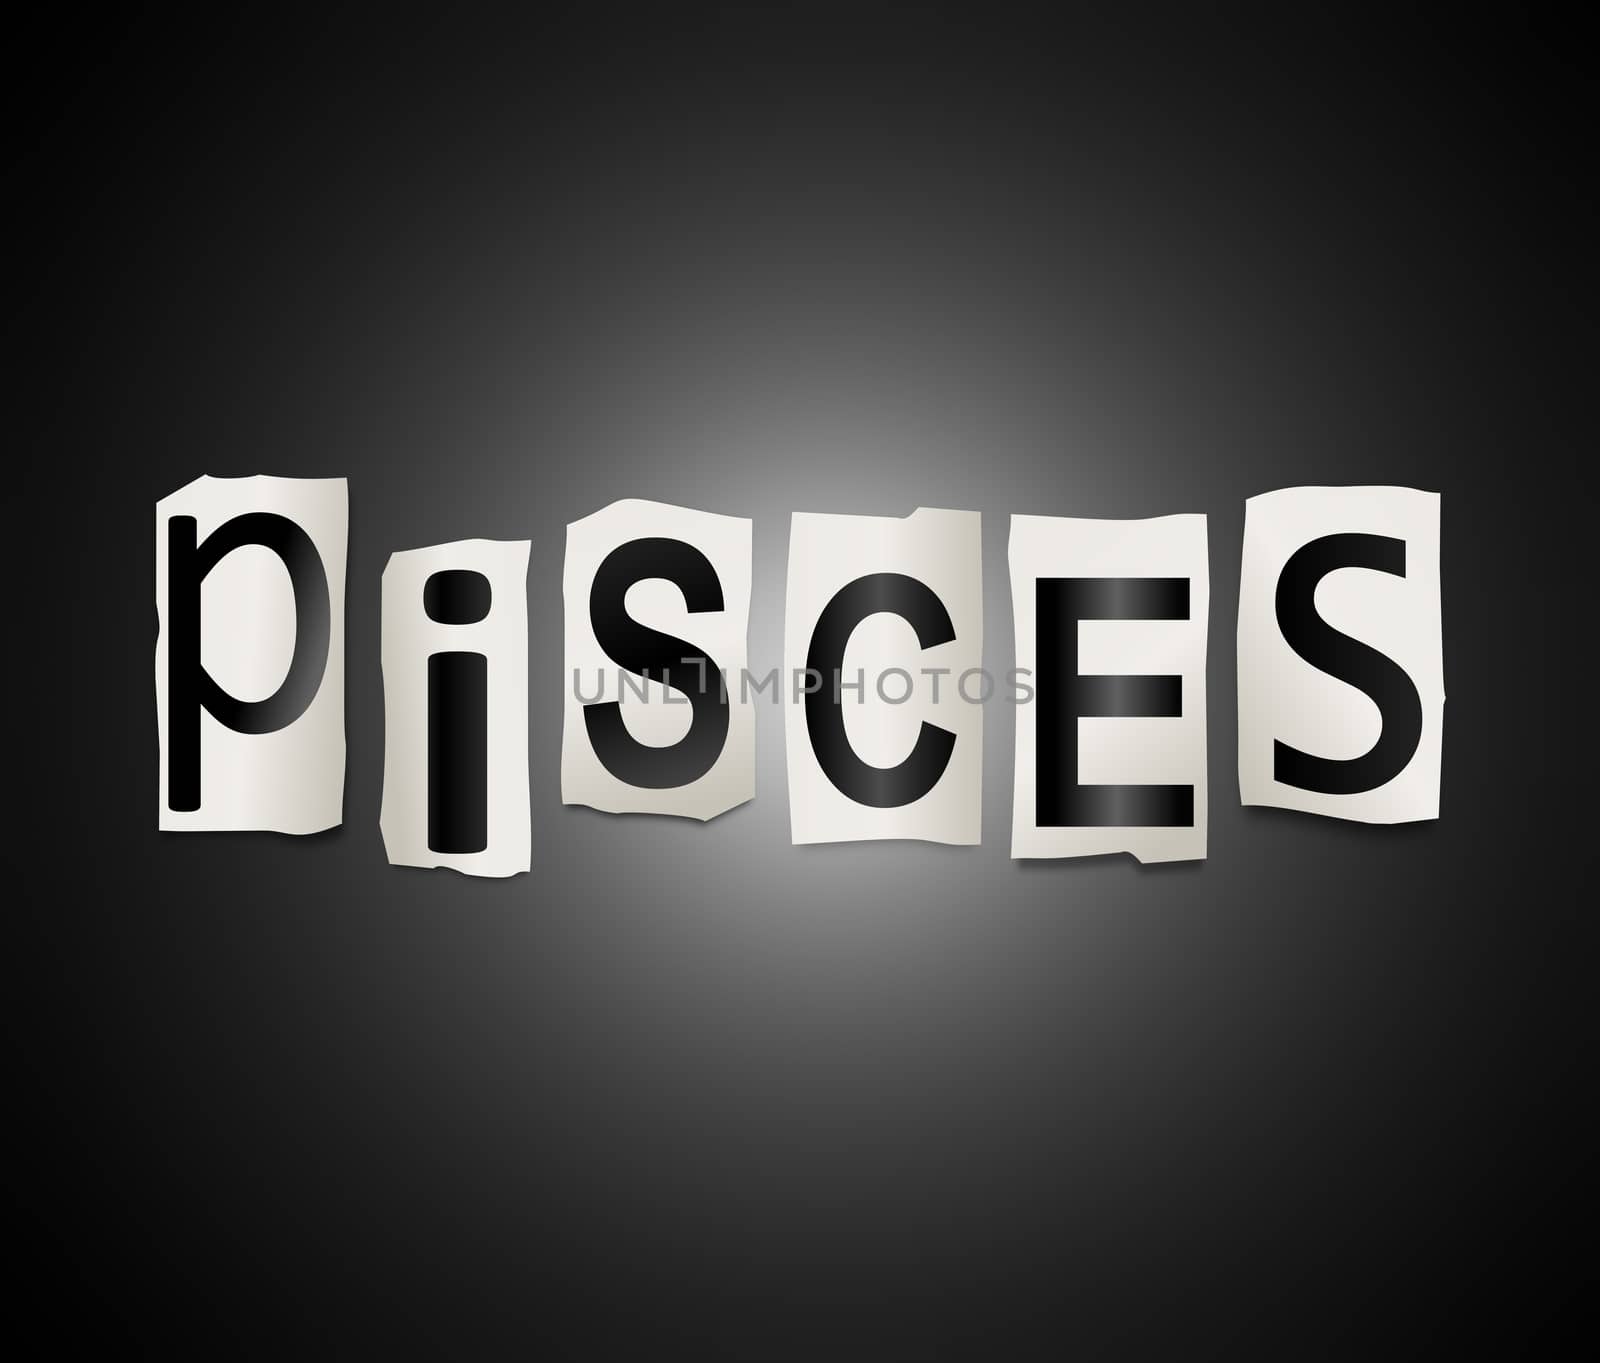 Illustration depicting a set of cut out printed letters arranged to form the word pisces.